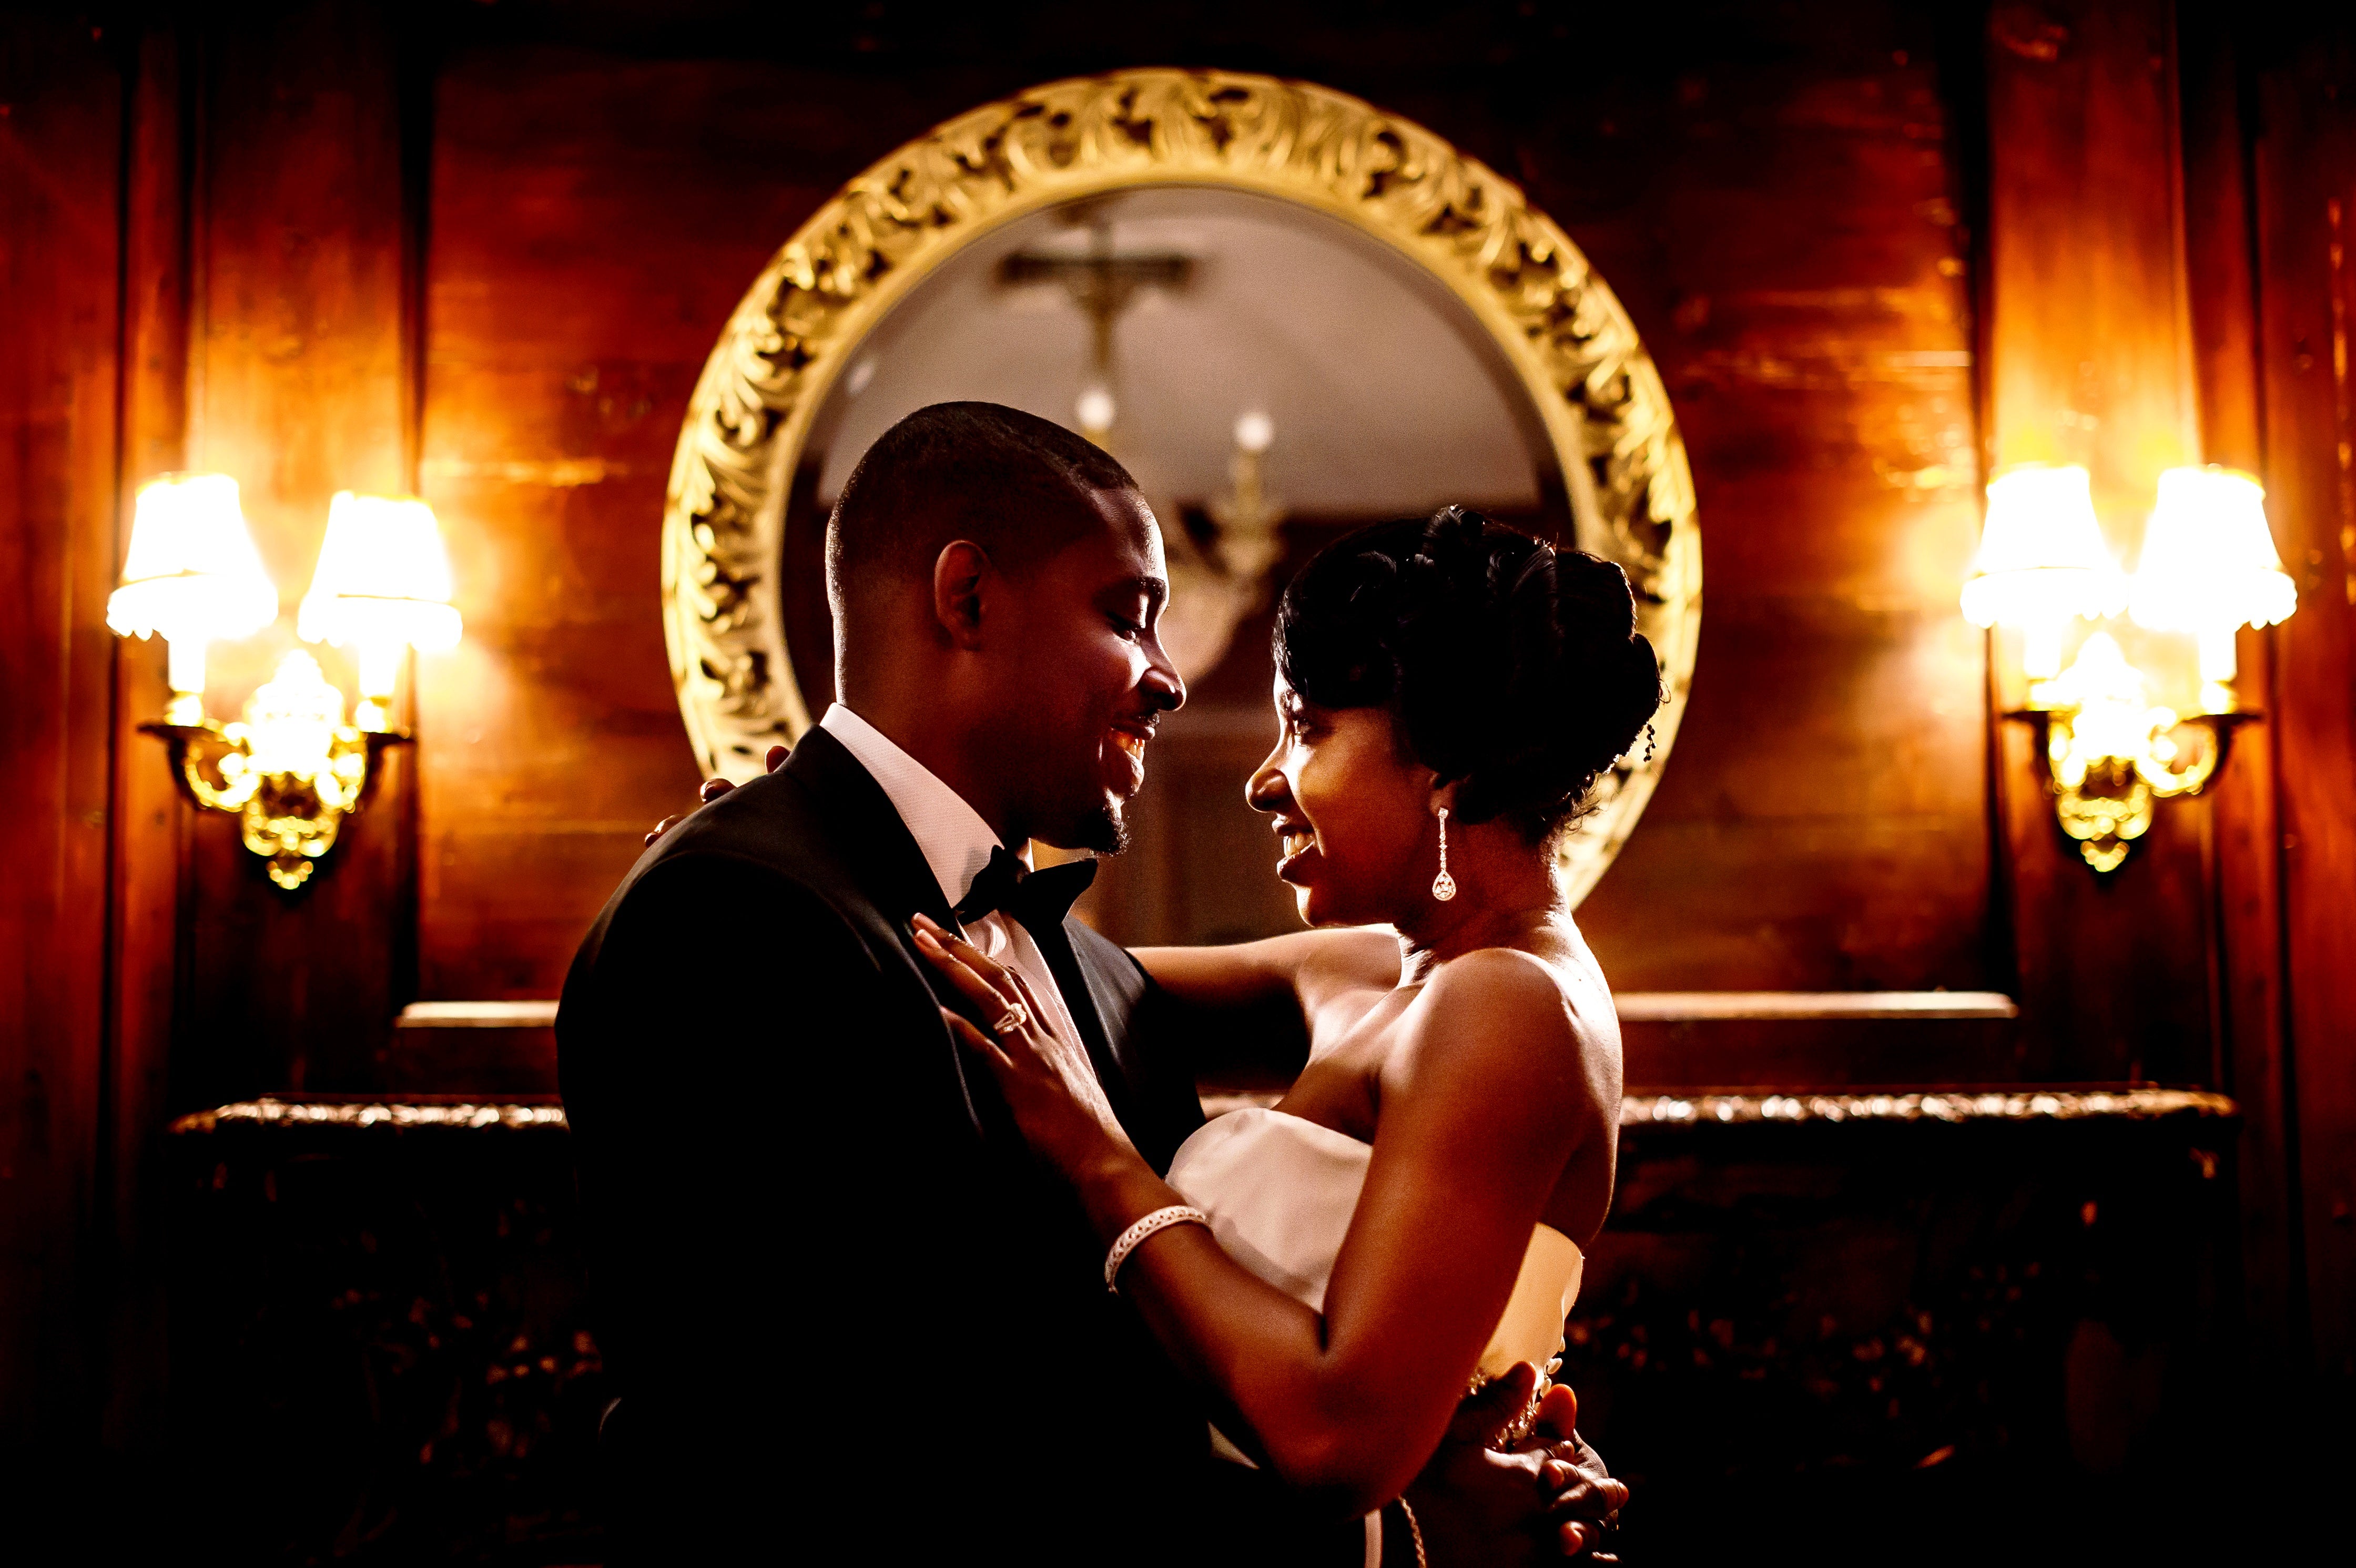 Bridal Bliss: Kareem and Latresse's Modern Wedding Was The Sweetest Thing
